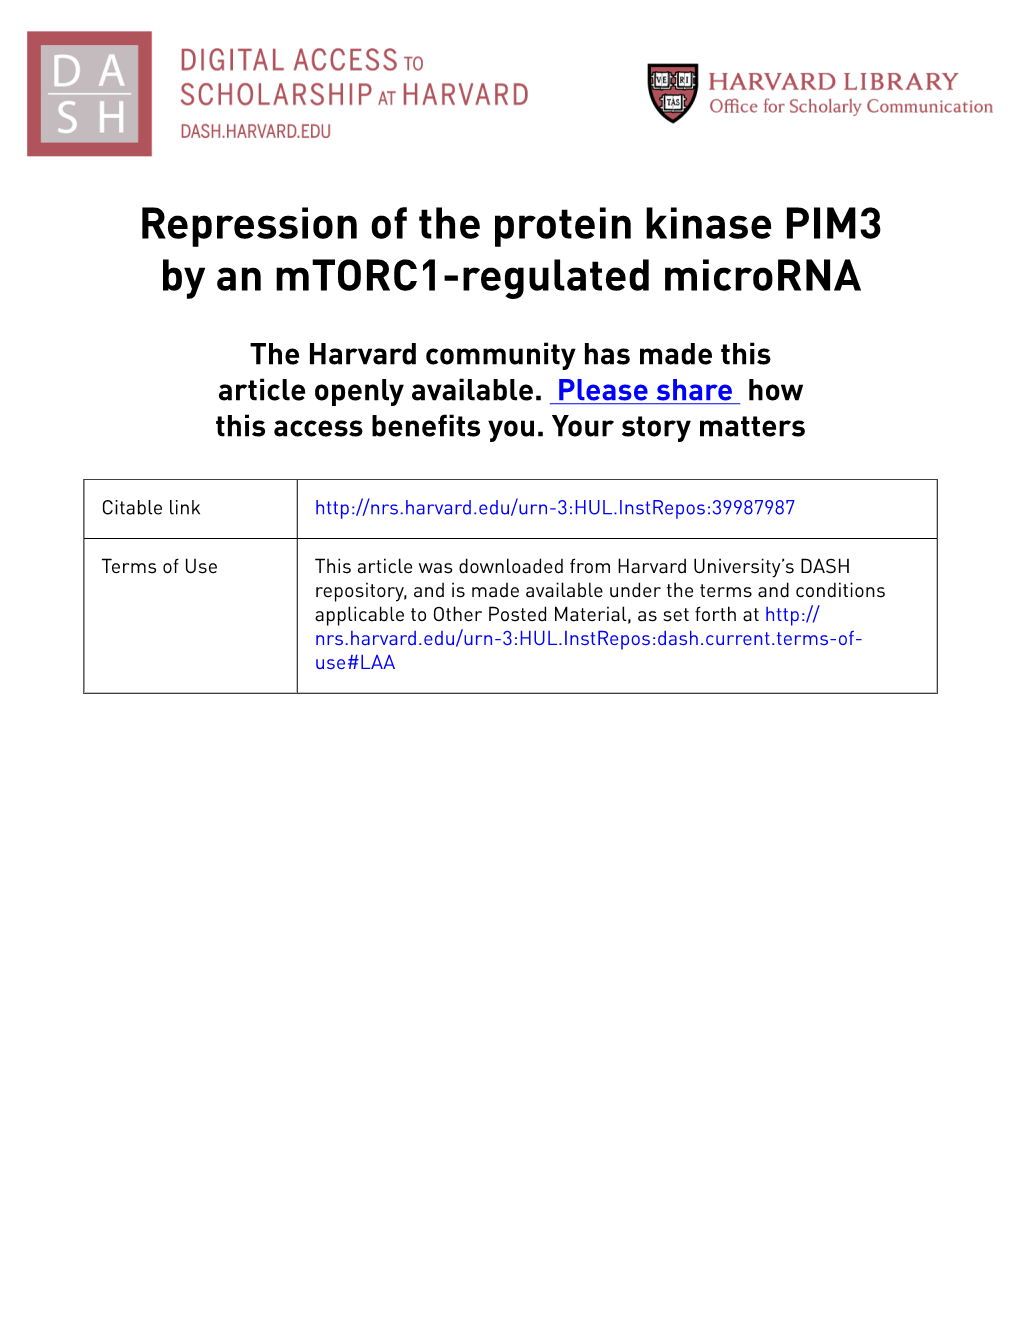 Repression of the Protein Kinase PIM3 by an Mtorc1-Regulated Microrna